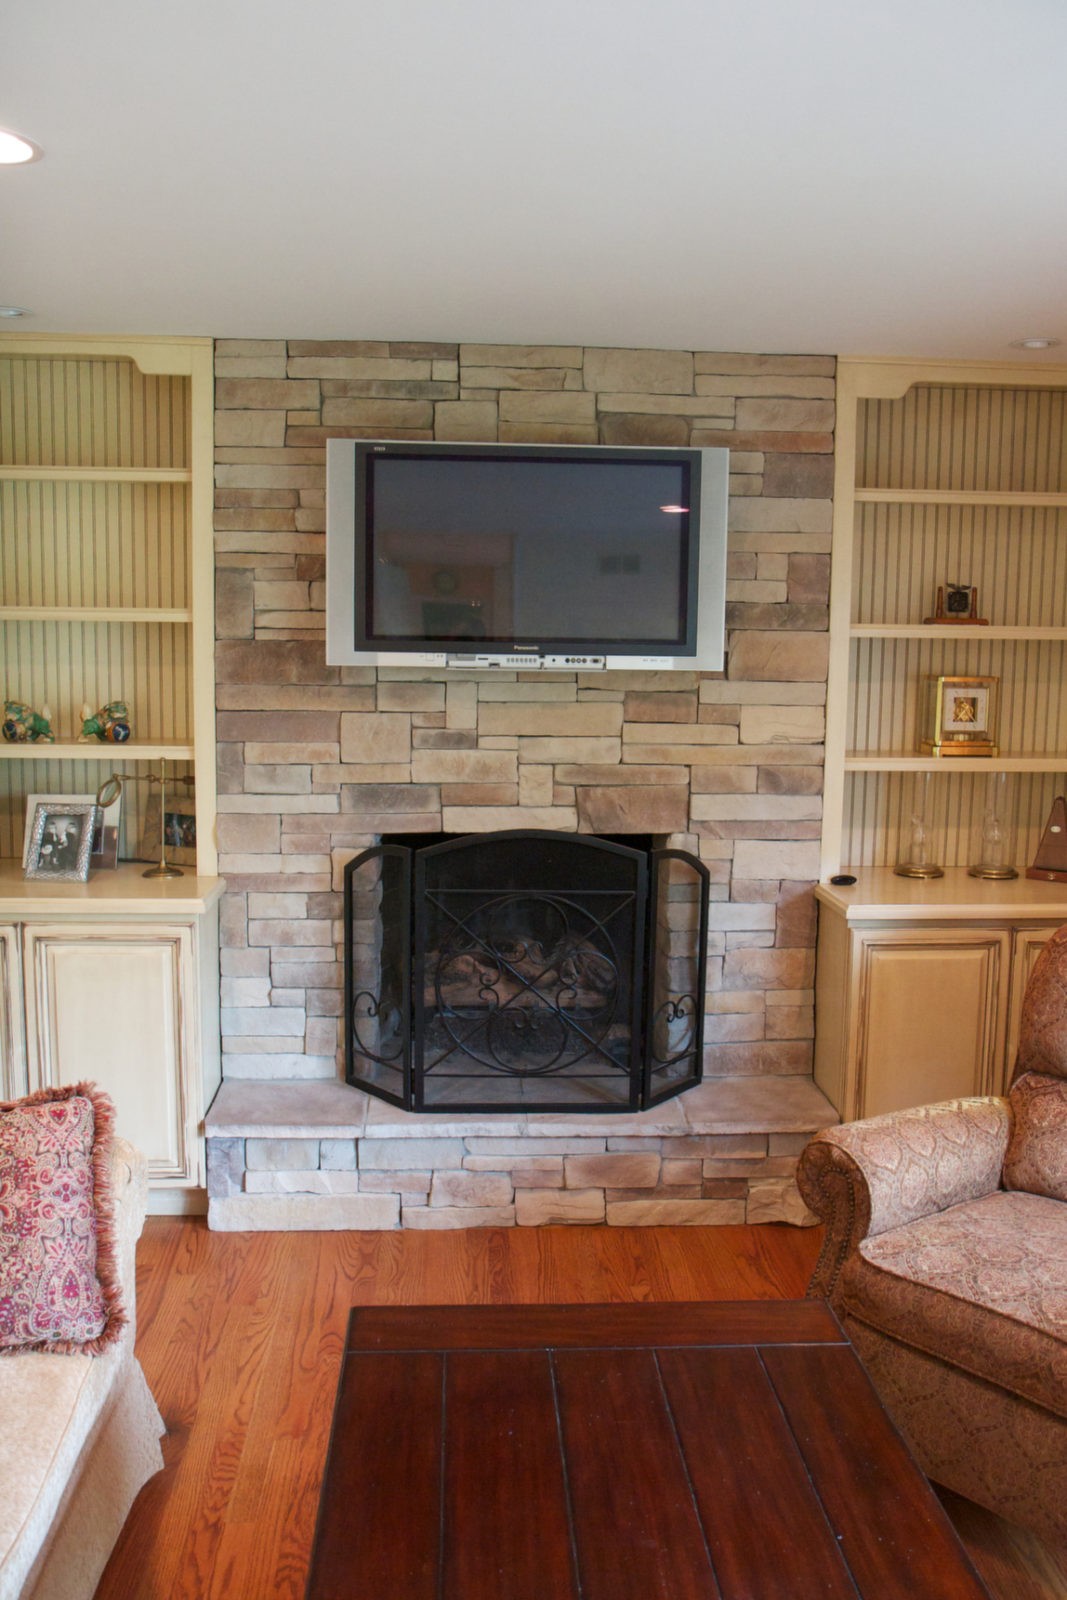 Mountain ledgestone dry stack fireplace with a fireplace screen